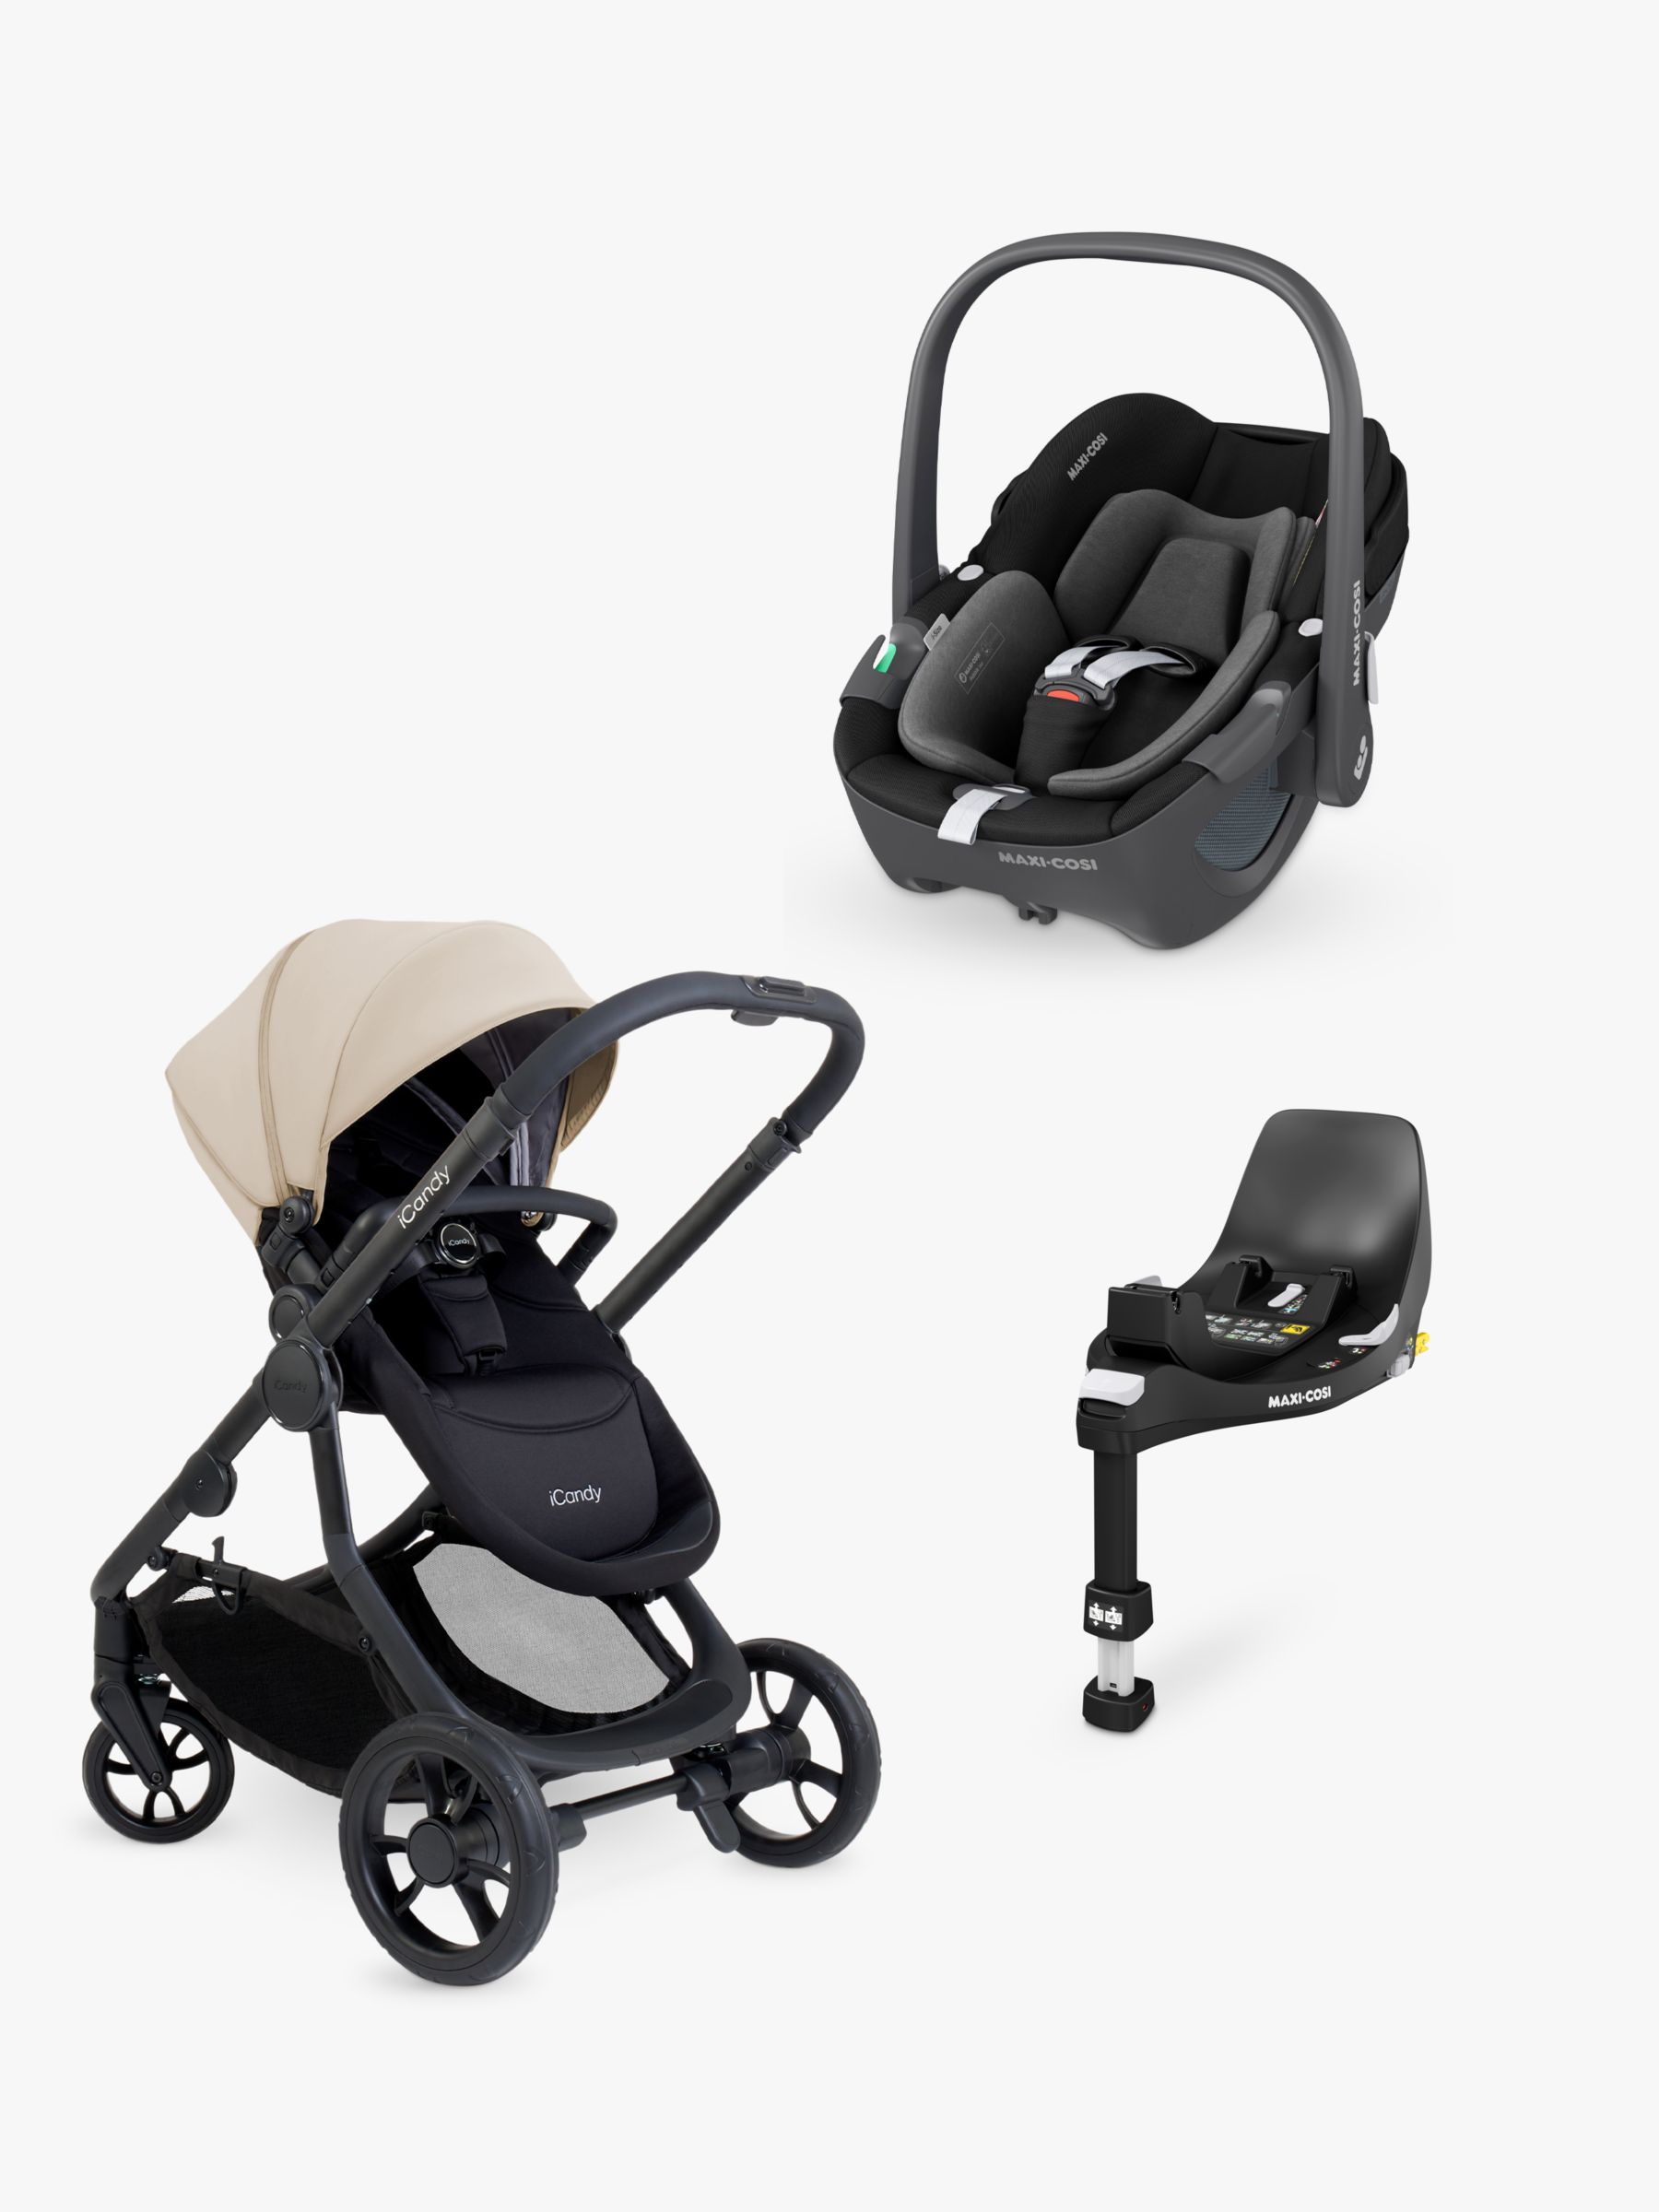 iCandy 4 Pushchair with Maxi-Cosi Pebble 360 i-Size Baby Car Seat and FamilyFix 360 ISOFIX Base Bundle, Latte/Essential